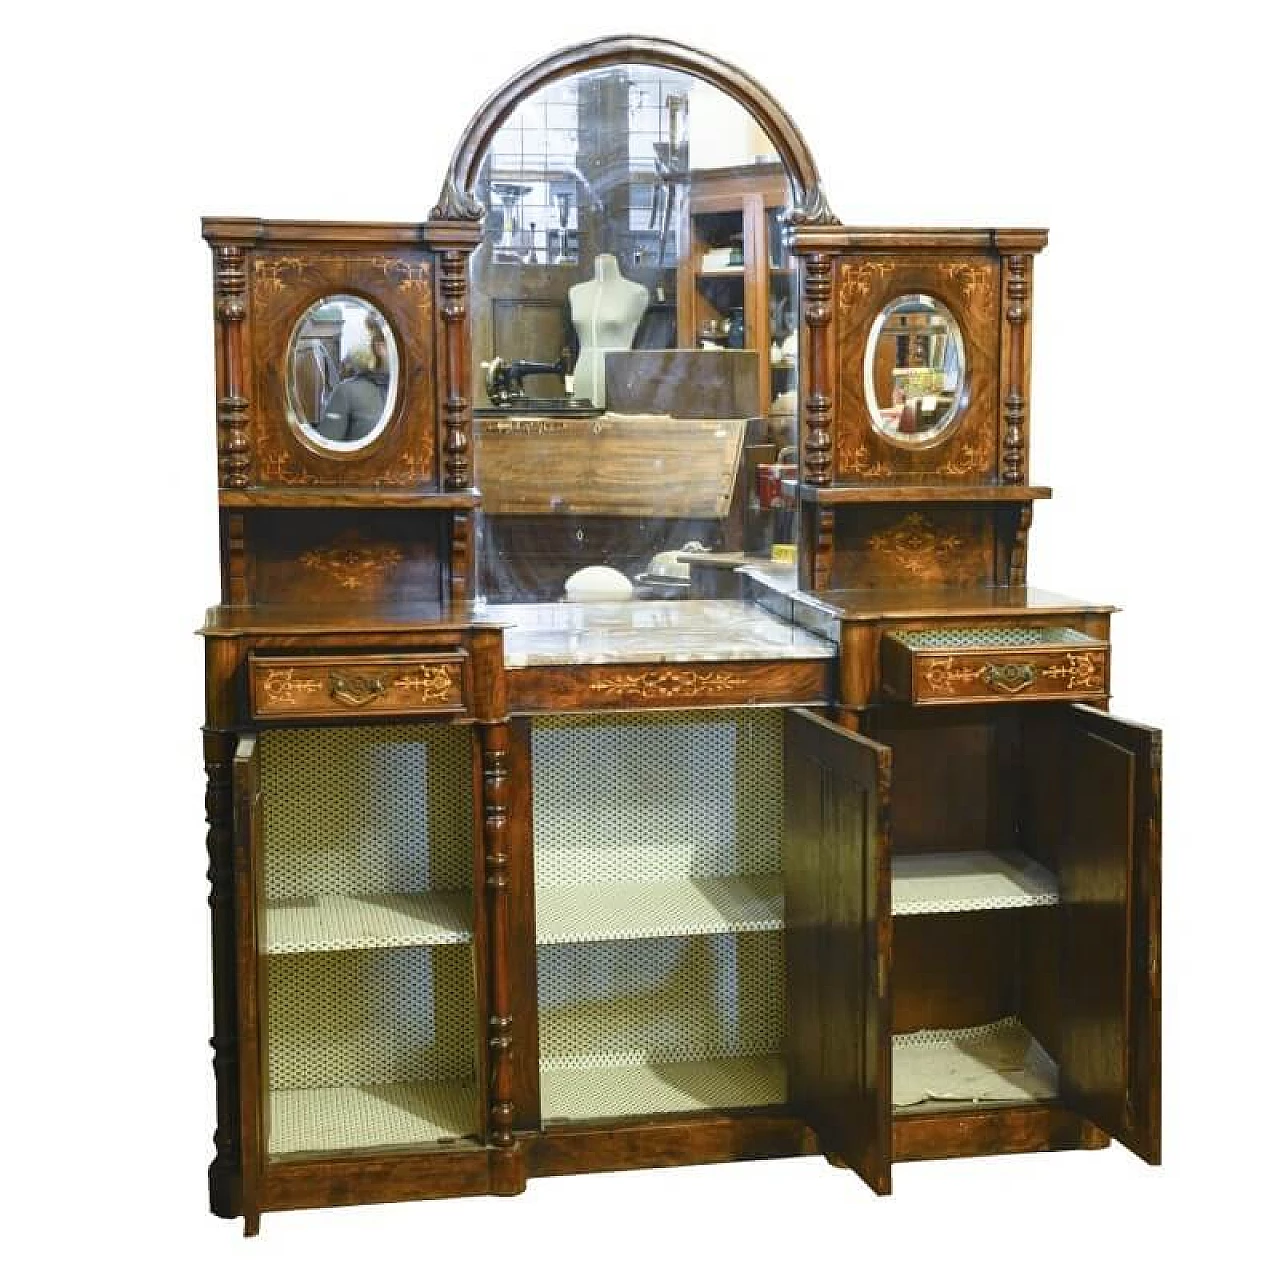 Inlaid walnut sideboard with mirror and marble top, mid-19th century 2